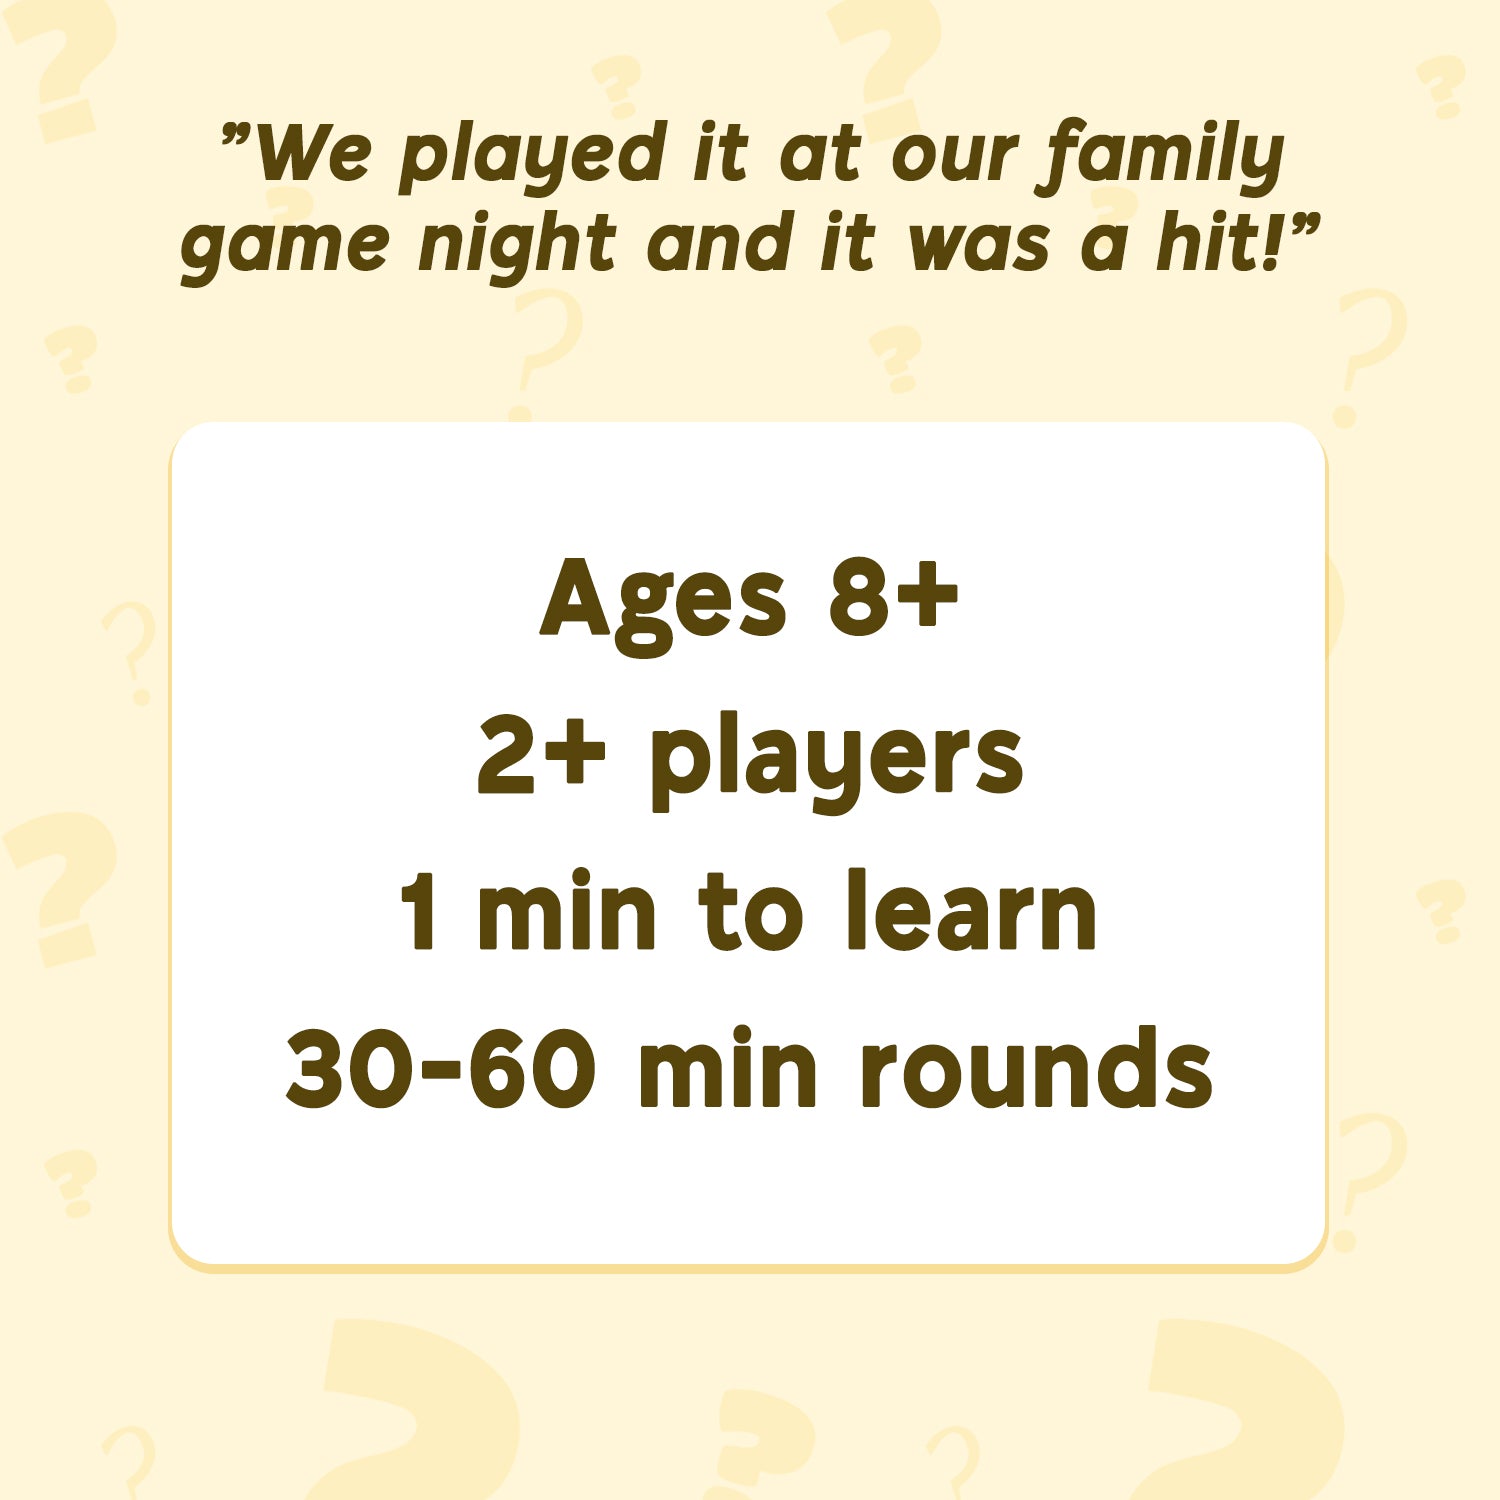 Who Knows More? Kids or Adults - the Ultimate Trivia Game for Kids, Teens and Adults